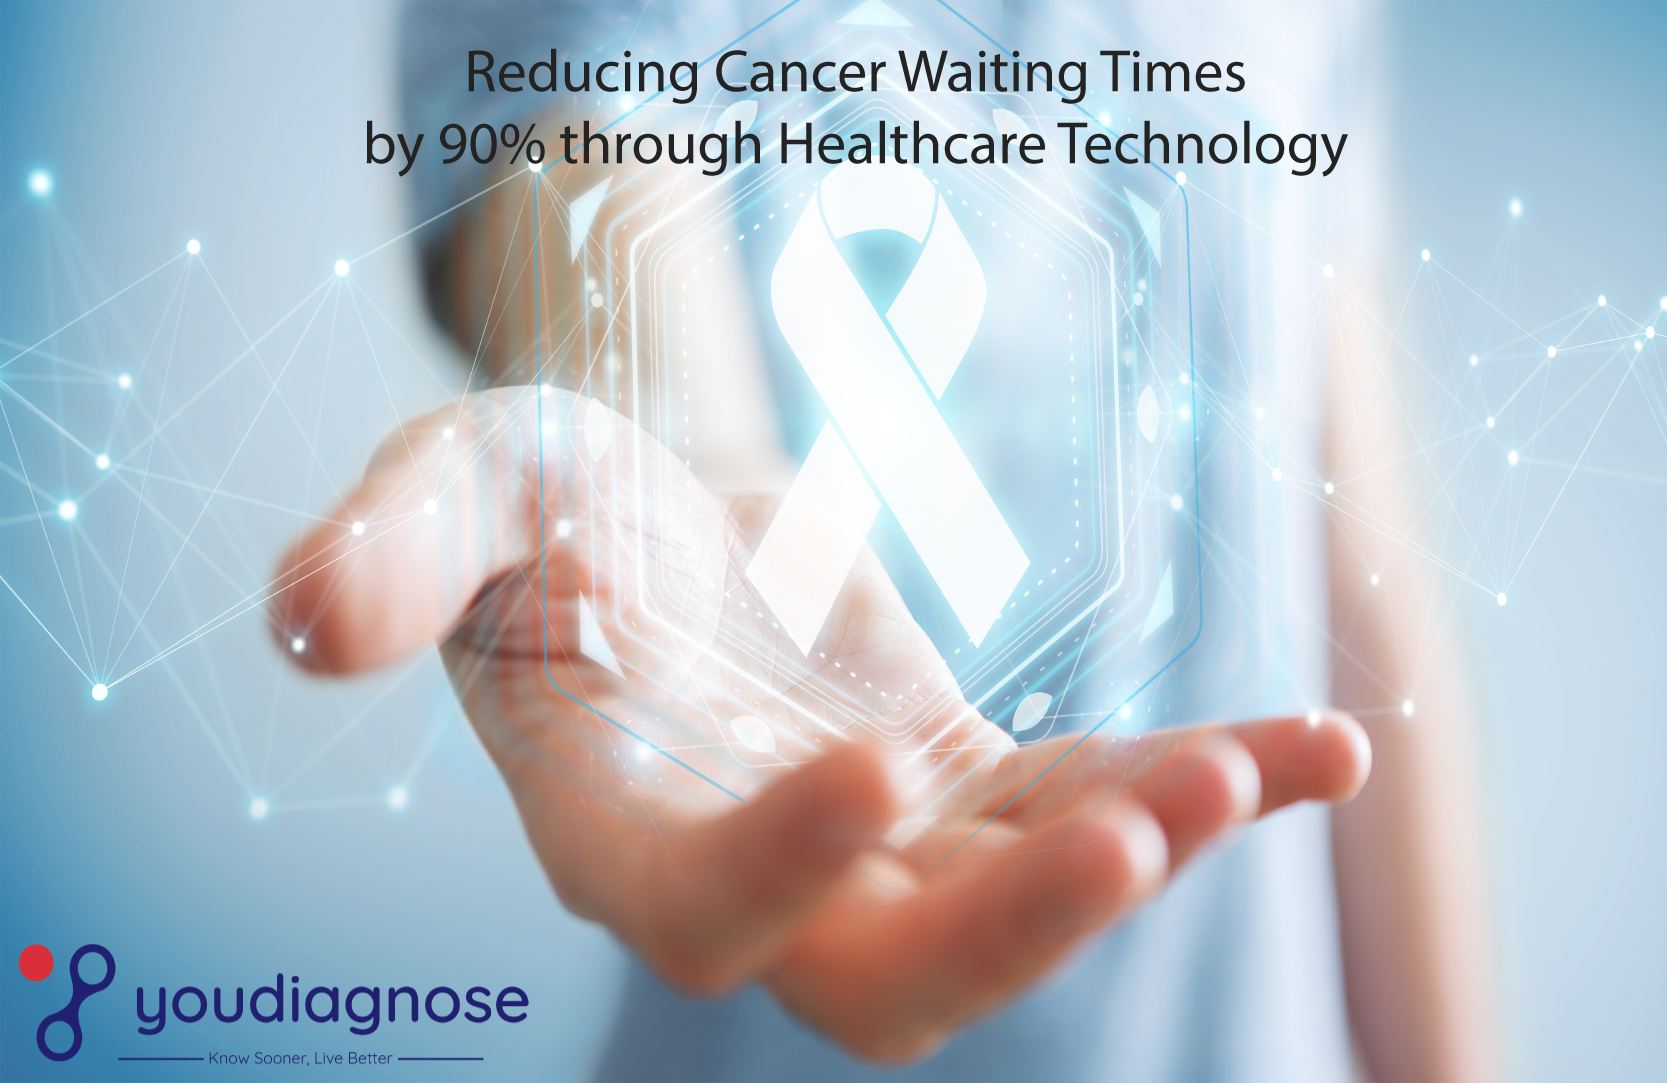 Reducing Cancer Waiting Times by 90% through Healthcare Technology